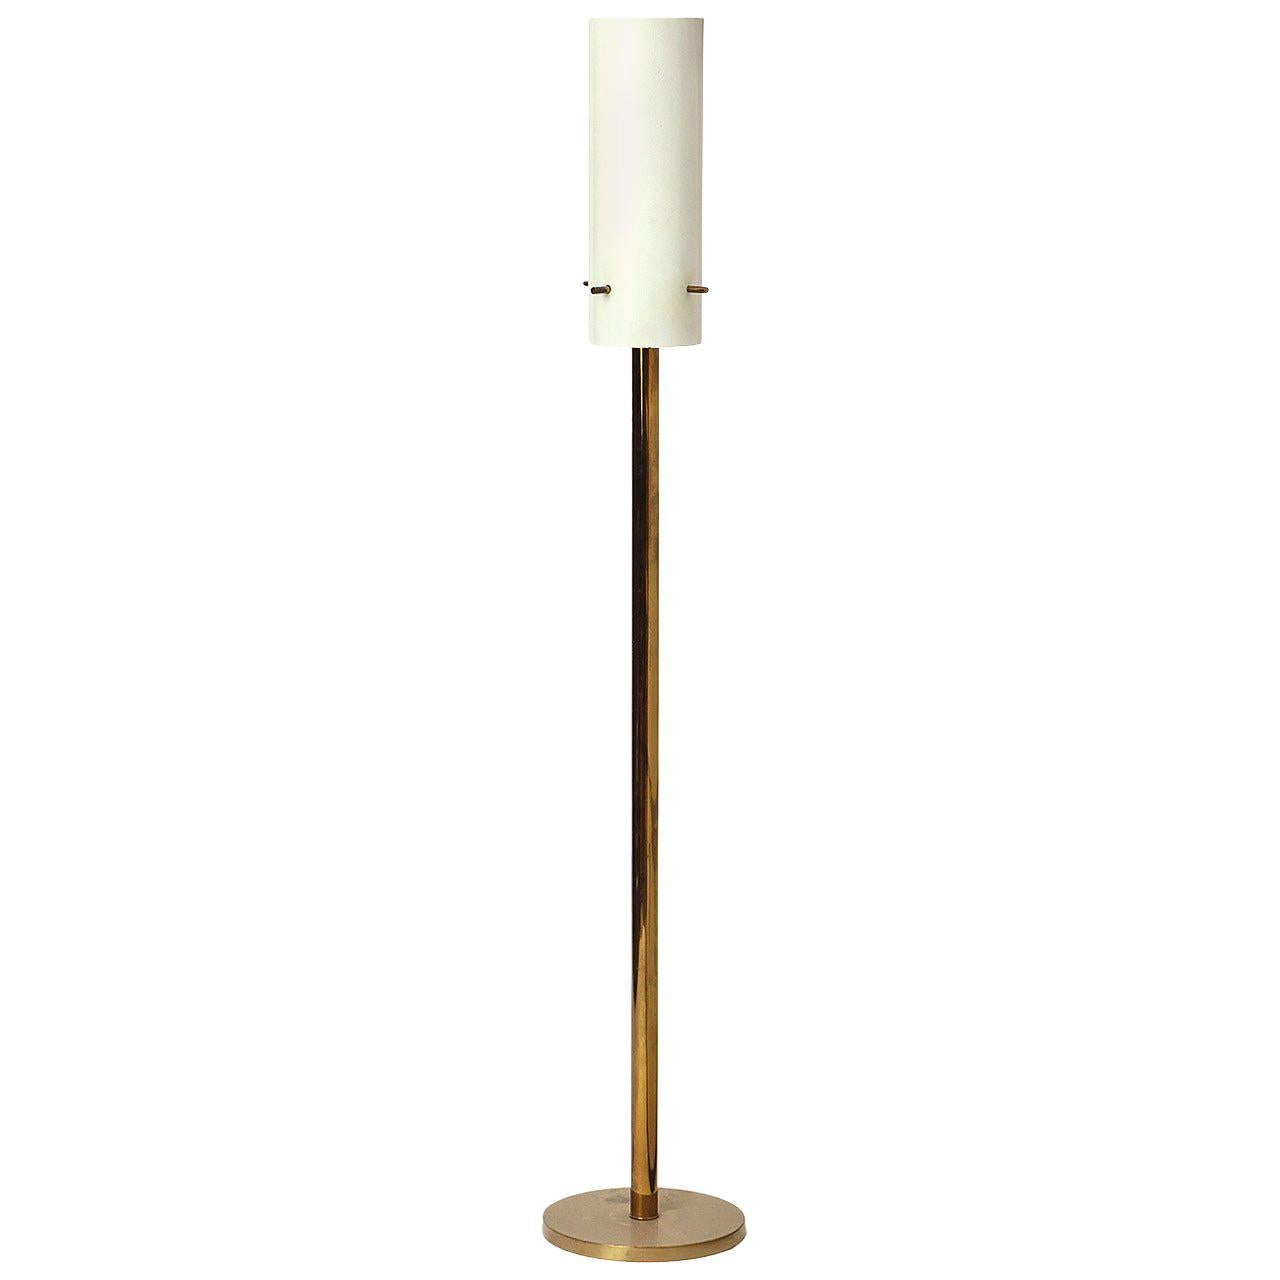 1960s Italian Cylindrical Brass Torchiere Floor Lamp Attributed to Arteluce For Sale